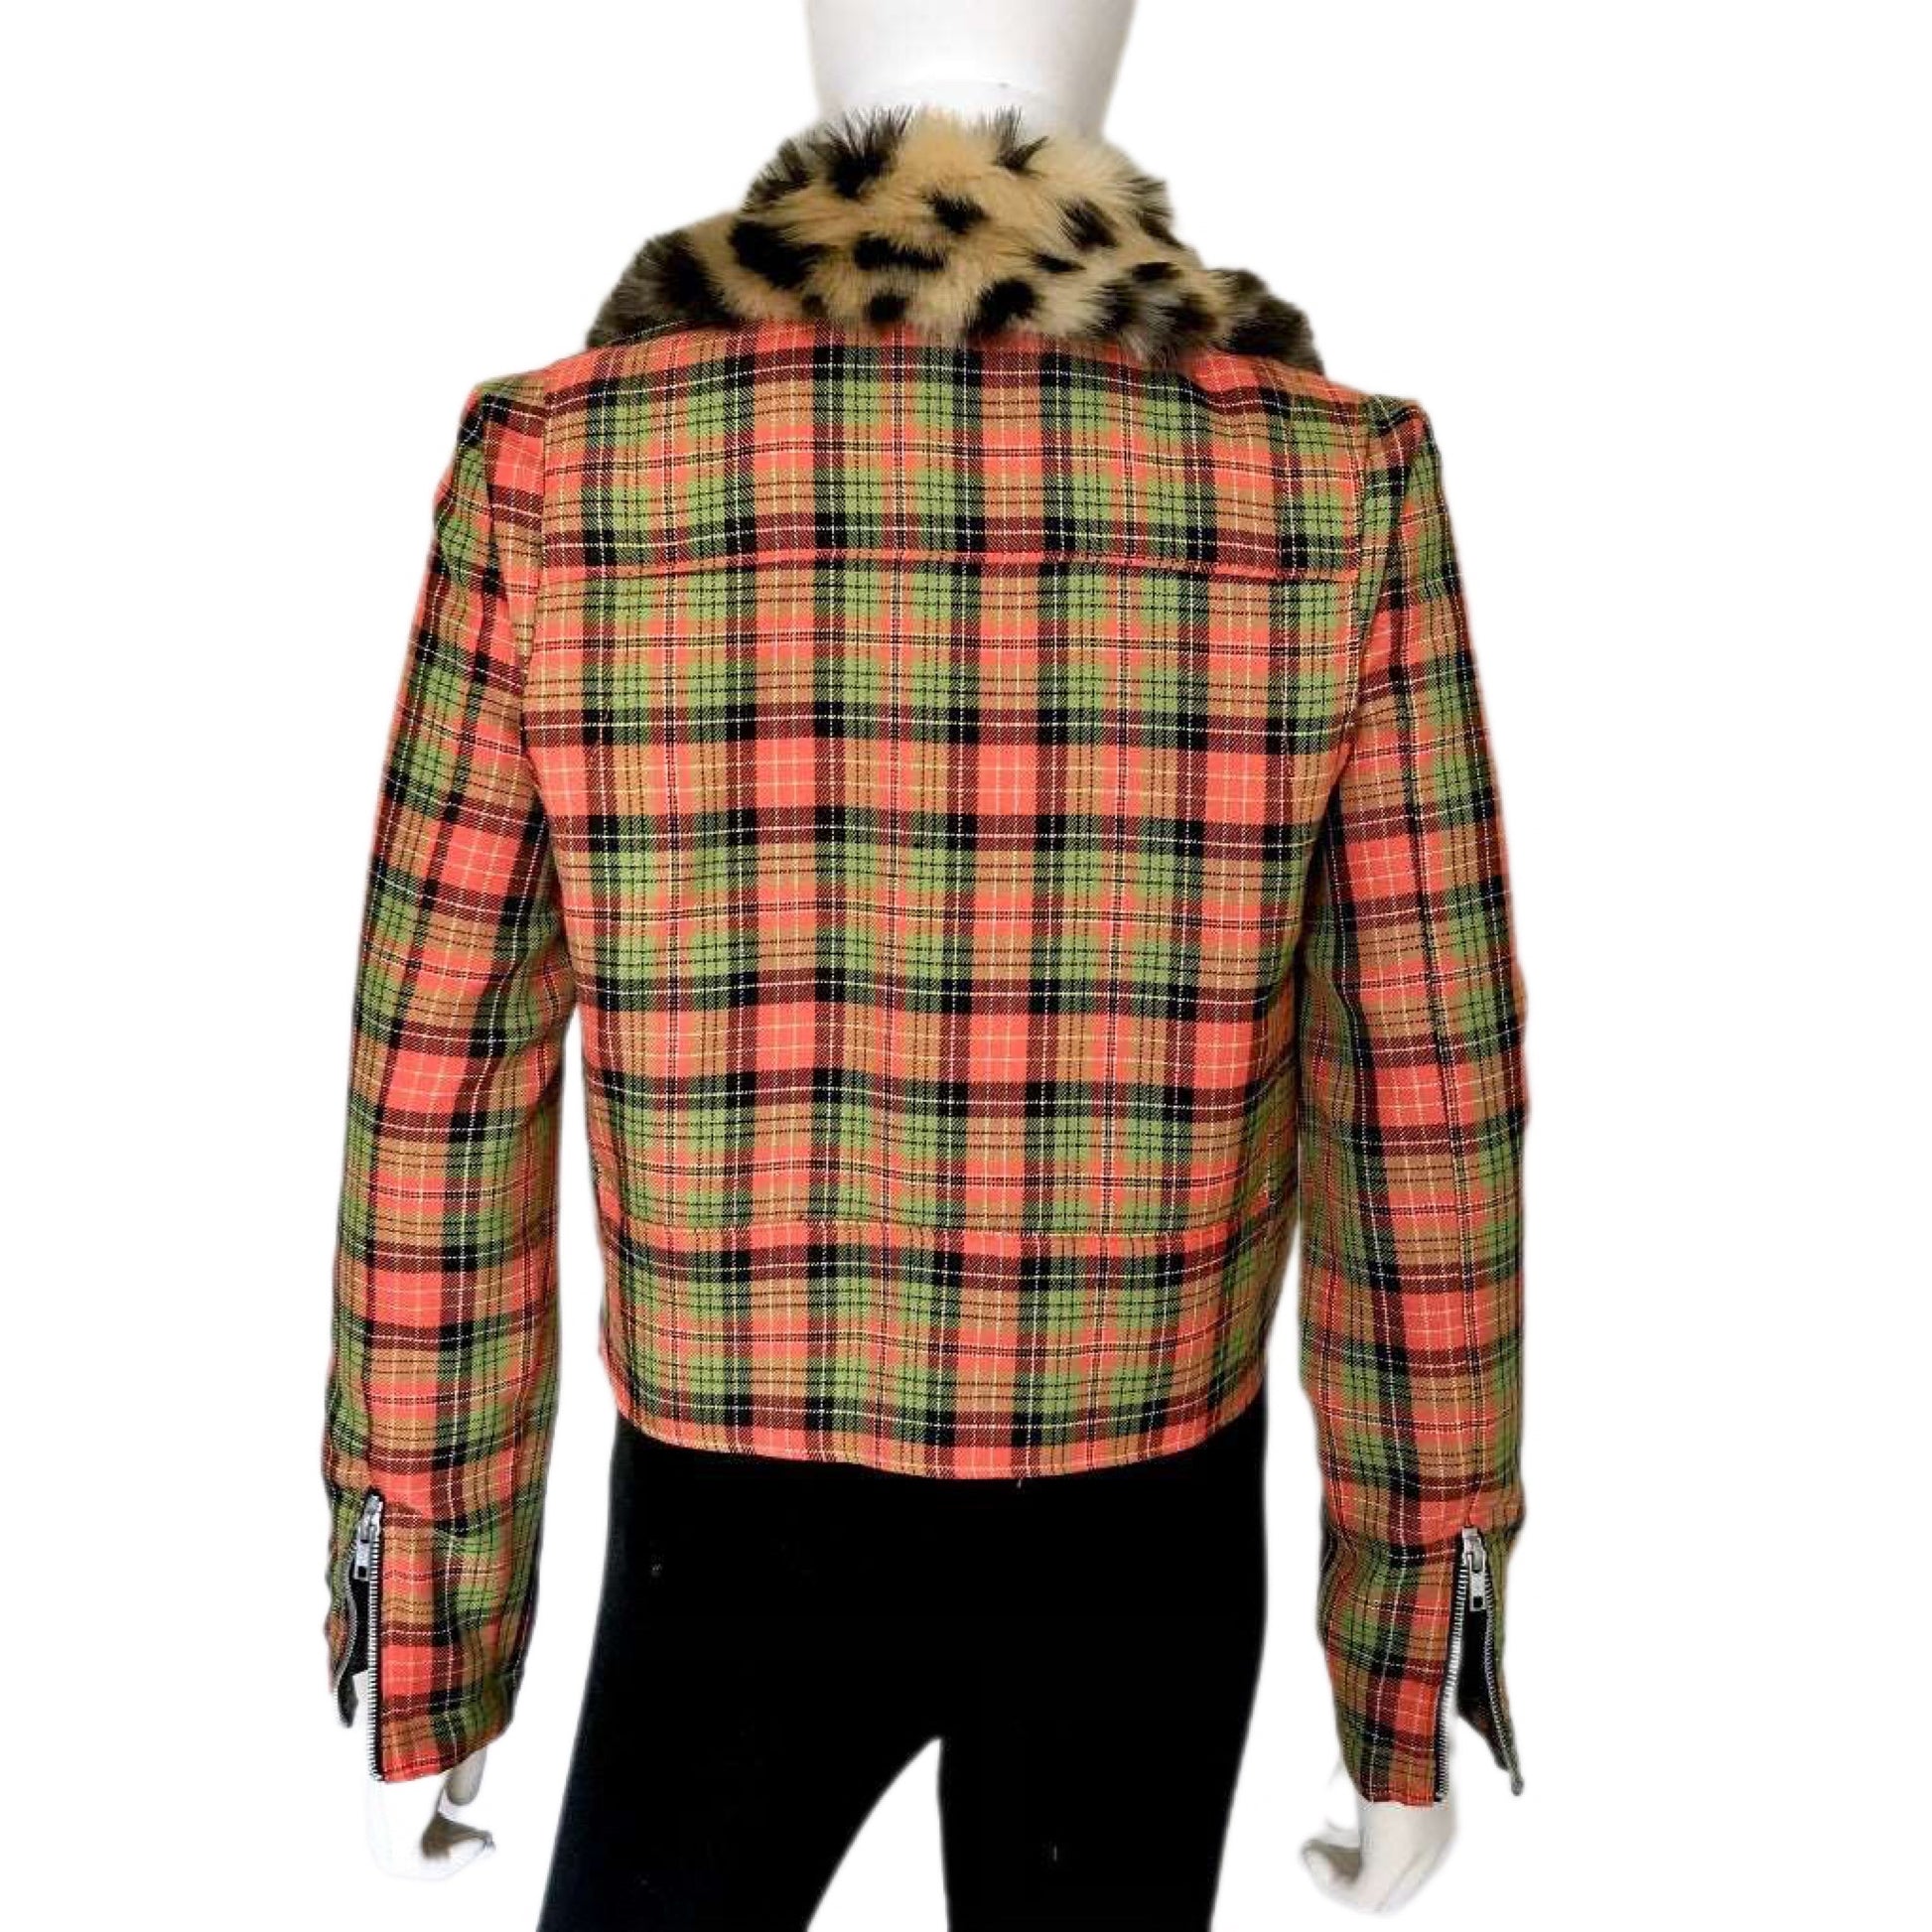 Plaid Women's Moto Jacket with Fur Collar - Size Small